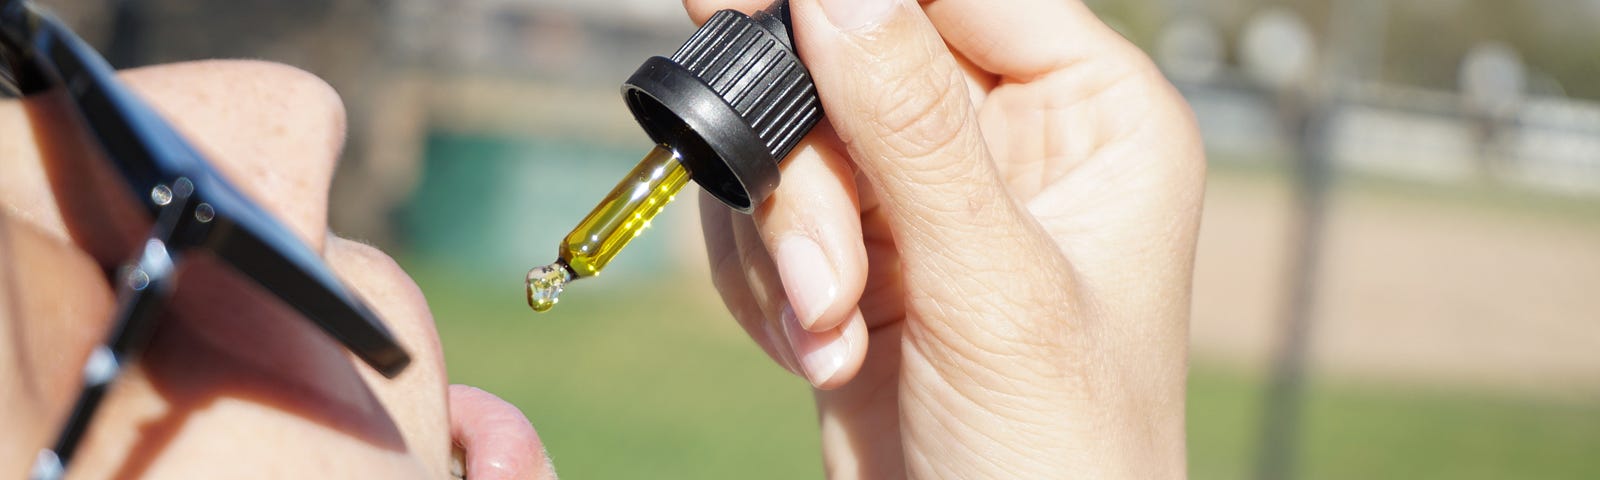 Woman with sunglasses uses an eyedropper to put amber-colored cannabidiol (CBD) into her mouth.